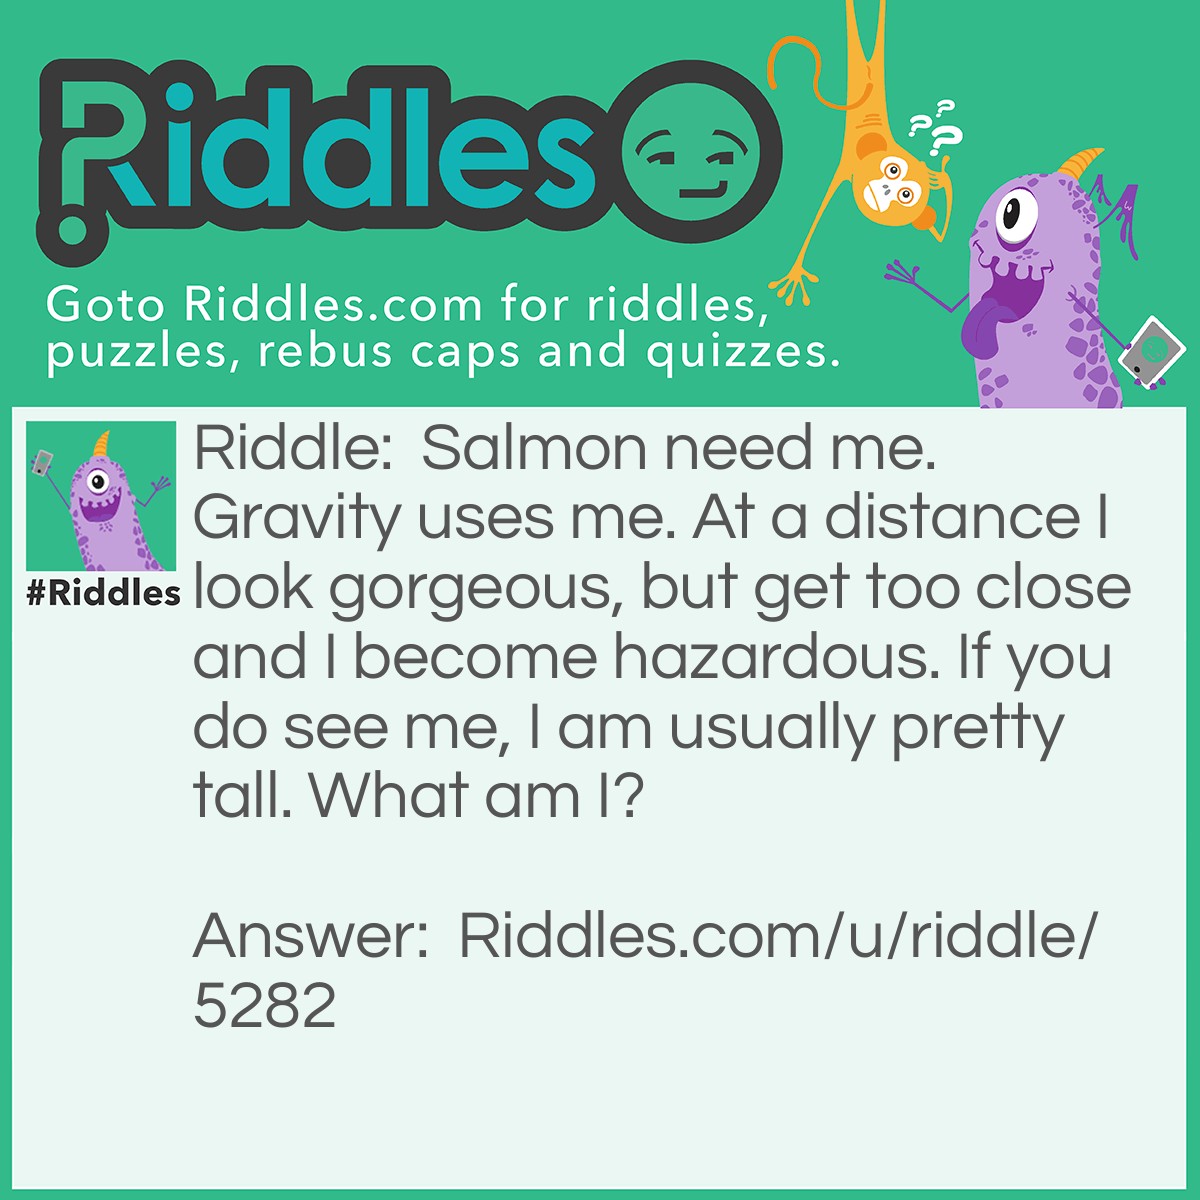 Riddle: Salmon need me. Gravity uses me. At a distance I look gorgeous, but get too close and I become hazardous. If you do see me, I am usually pretty tall. What am I? Answer: I am a Waterfall.